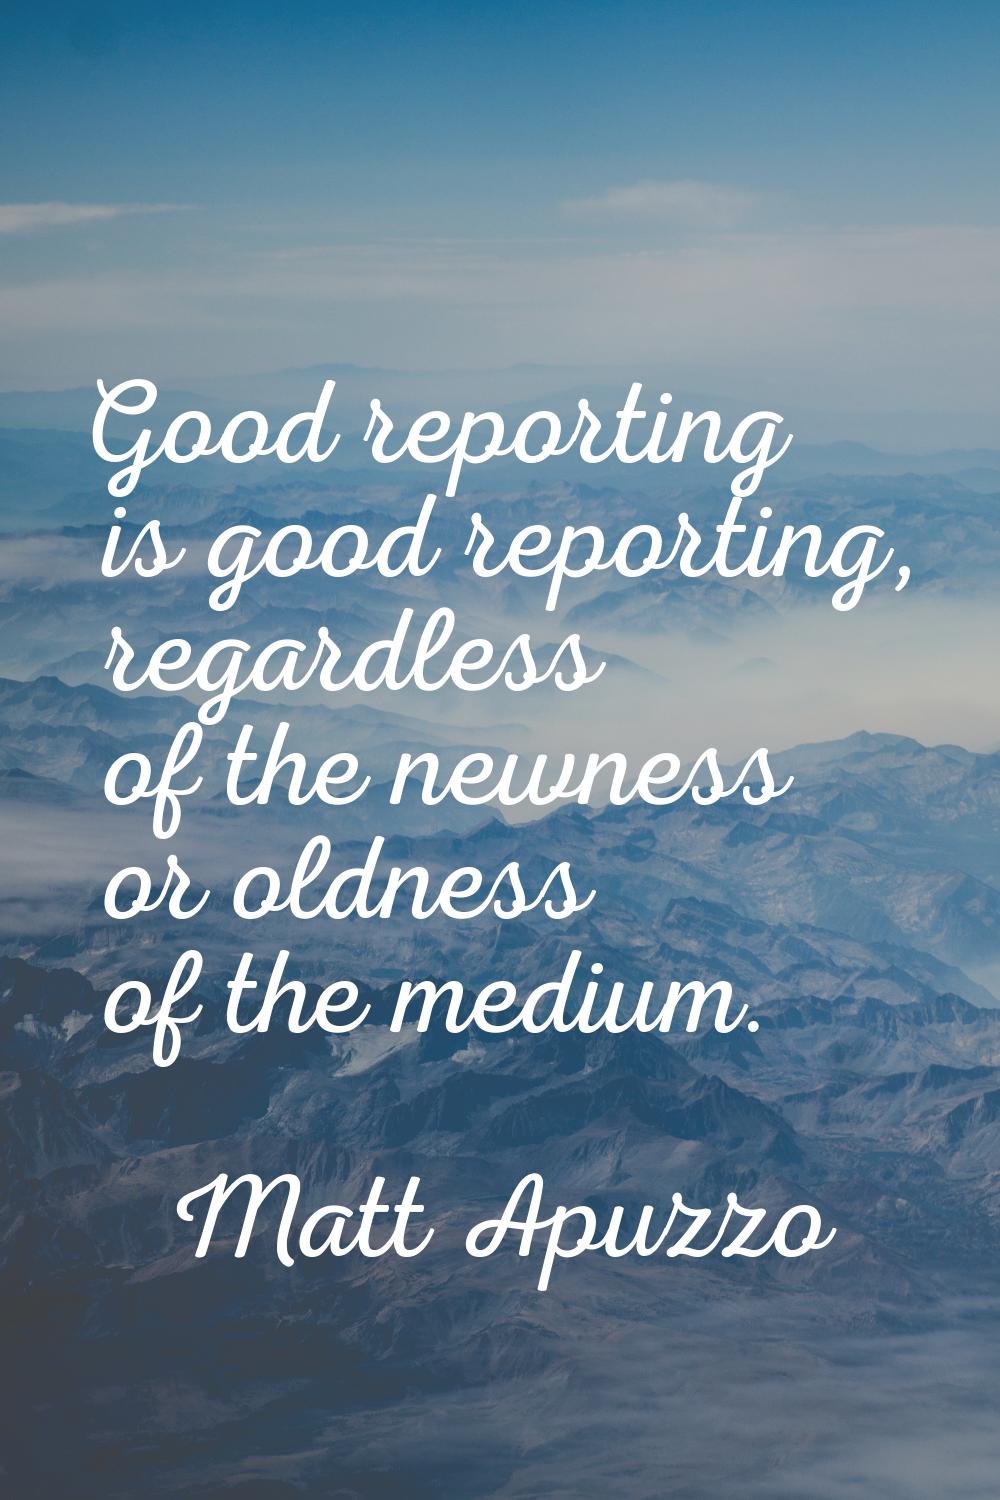 Good reporting is good reporting, regardless of the newness or oldness of the medium.